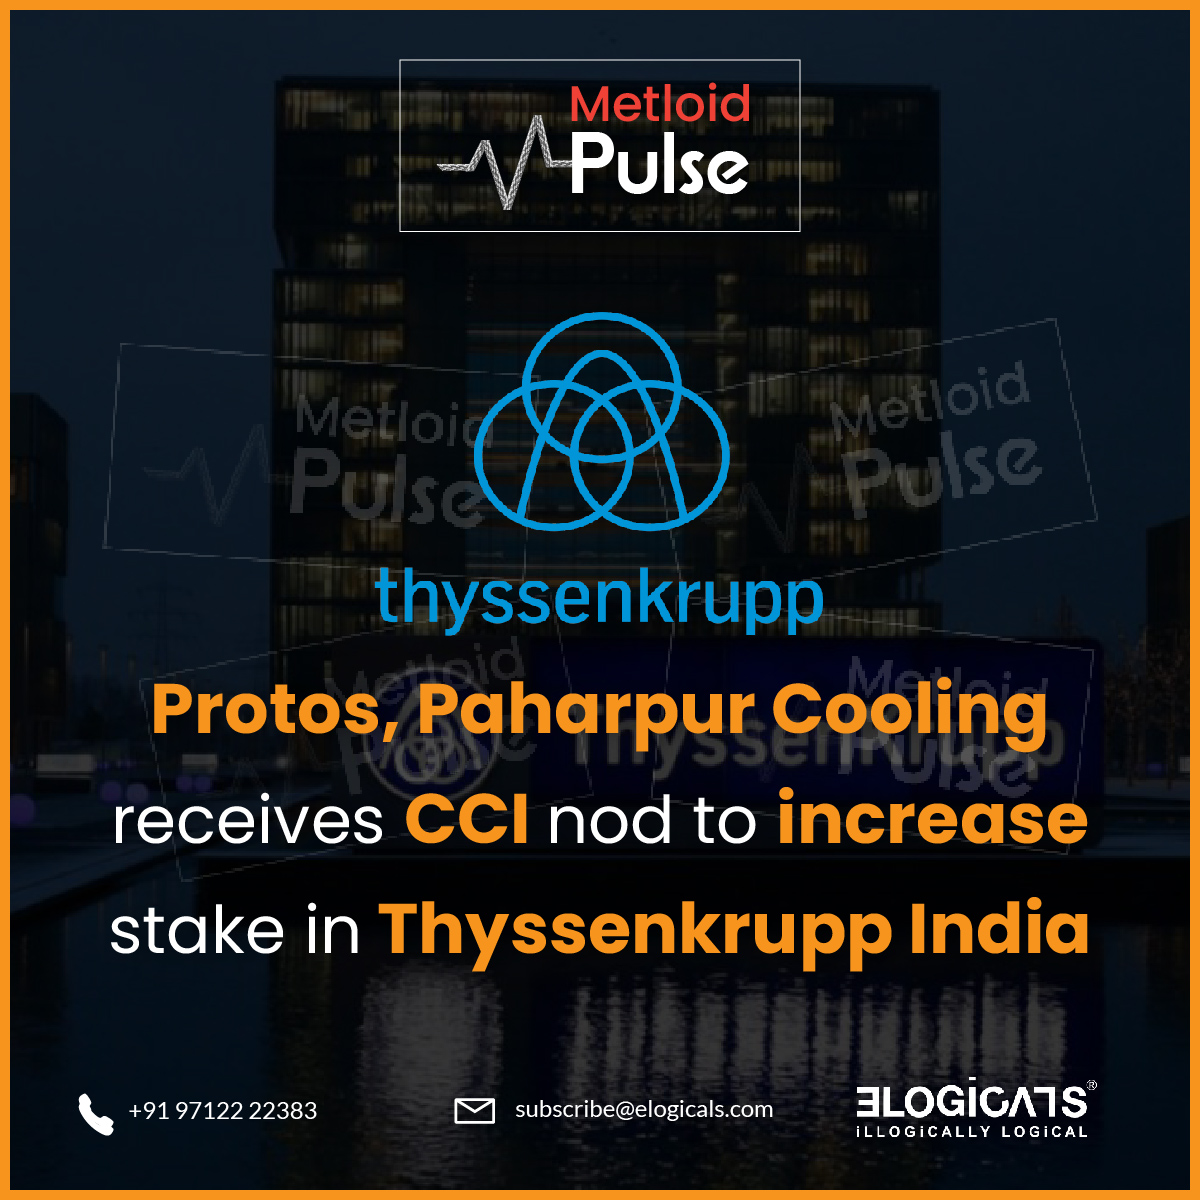 Protos, Paharpur Cooling gets  green signal from CCI to boost their stake in Thyssenkrupp India. #Protos #PaharpurCooling #ThyssenkruppIndia #CCIApproval #TheMetloid #Elogicals